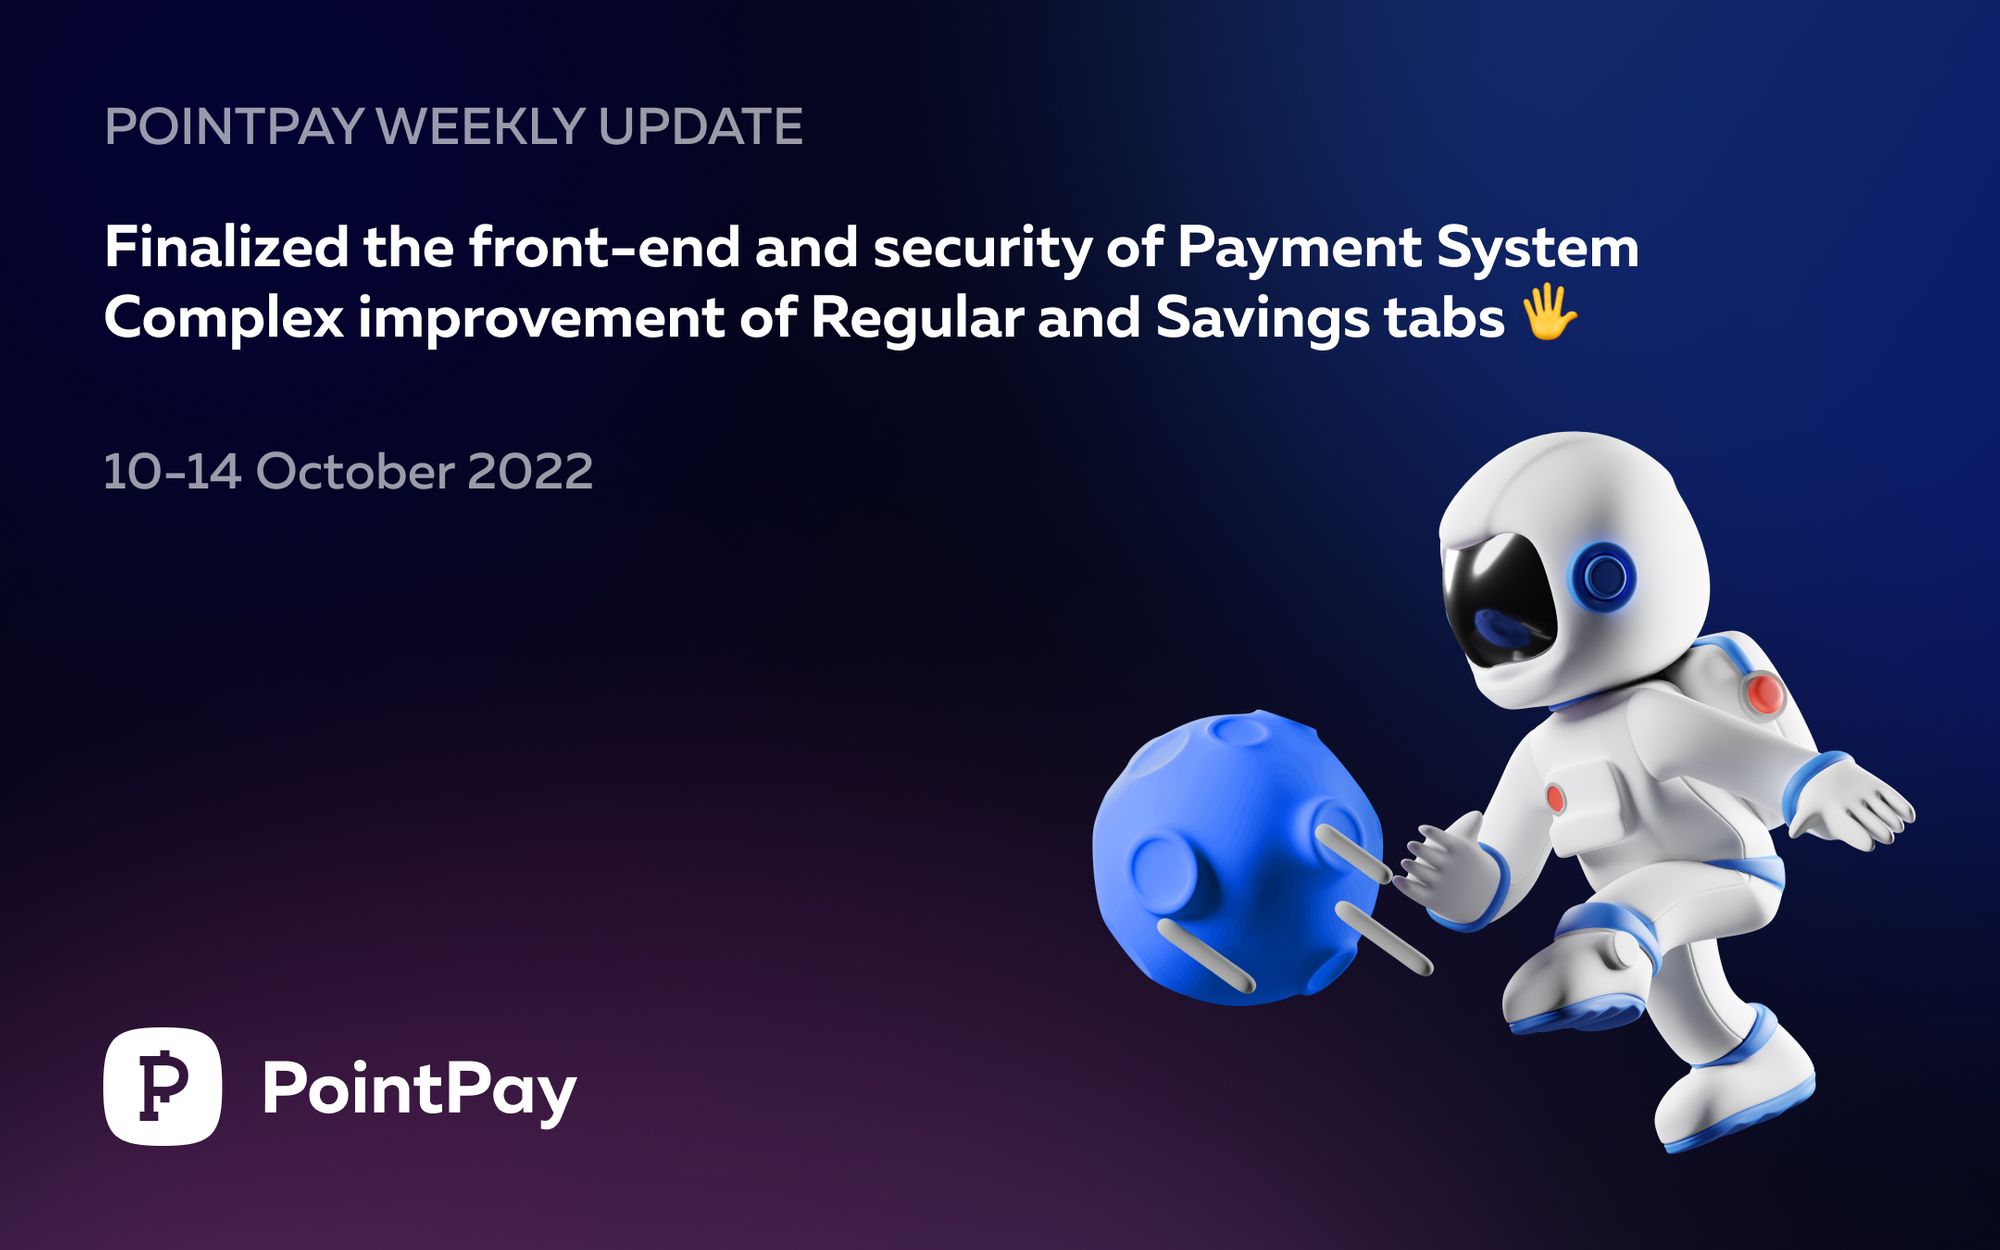 PointPay Weekly Update (10 - 14 October 2022)